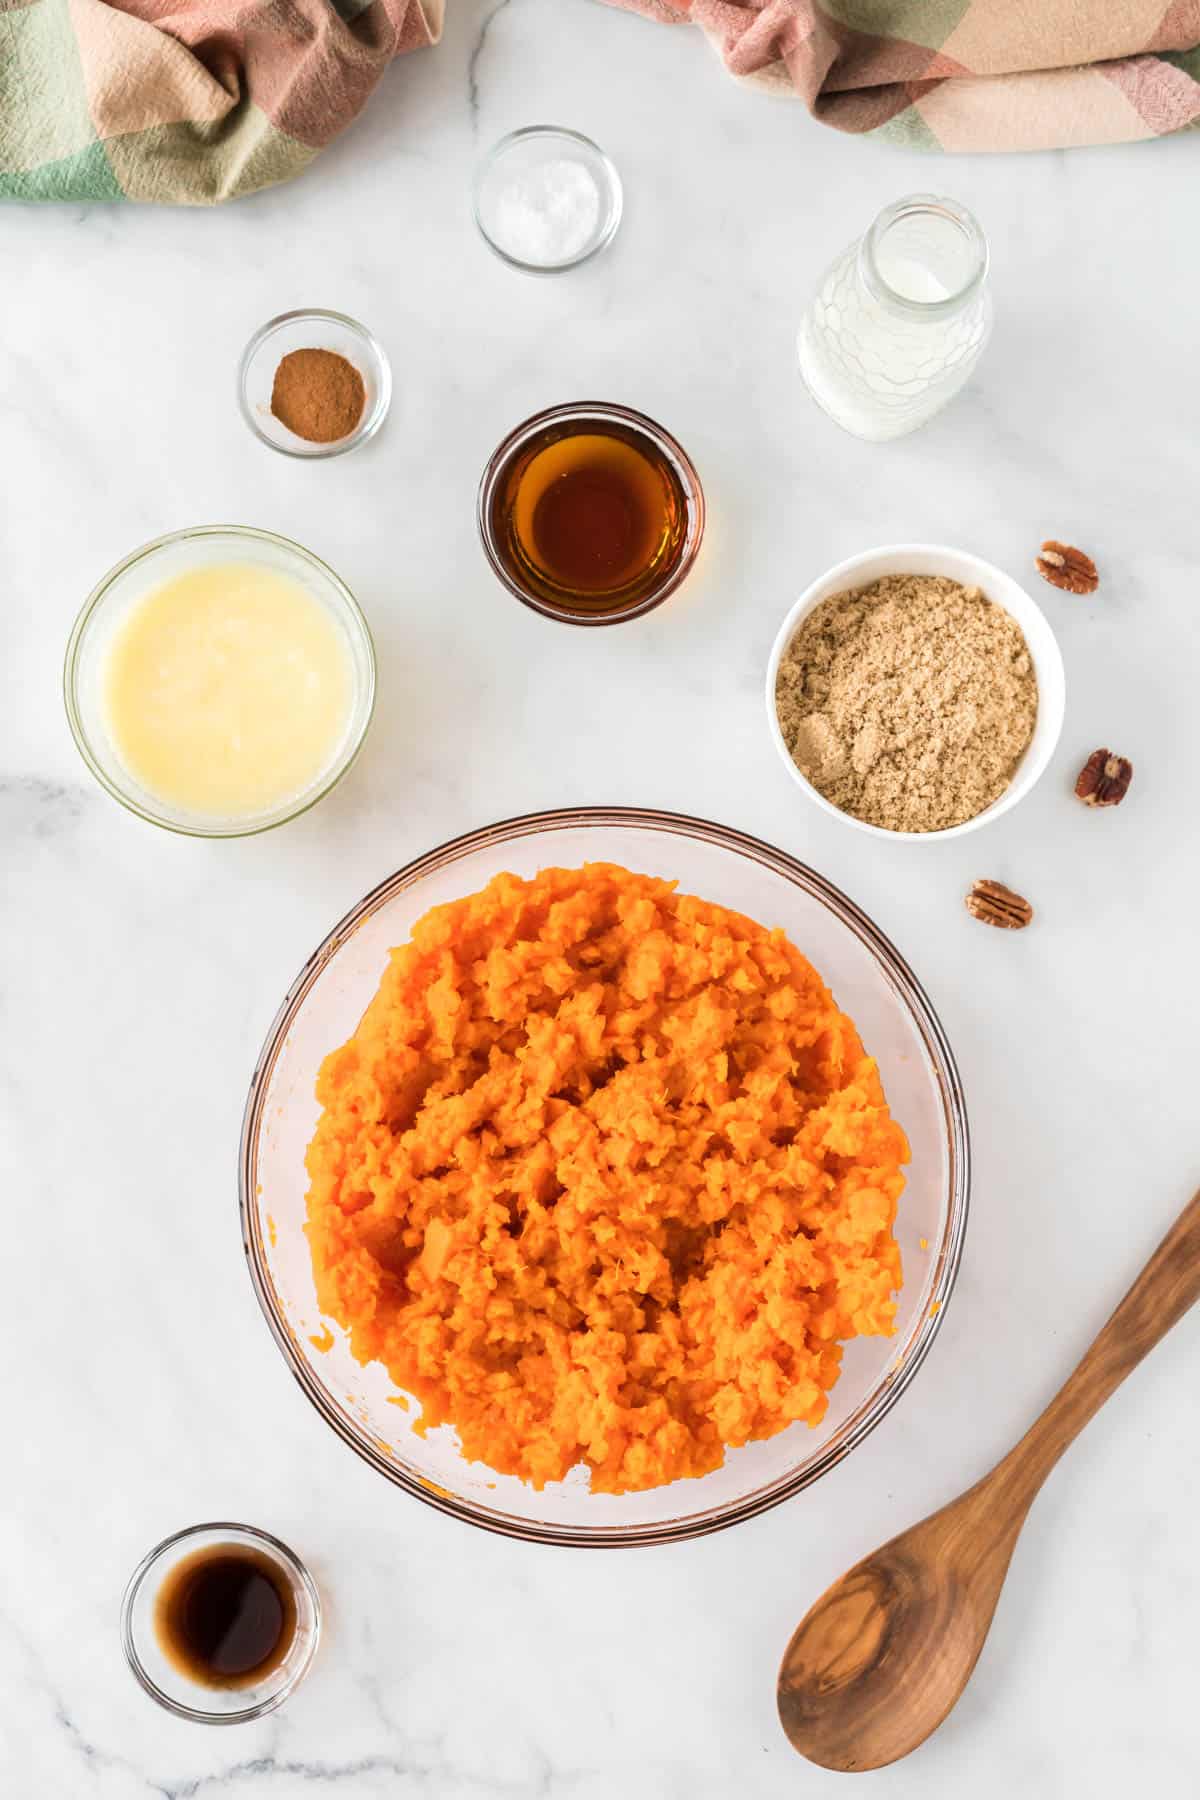 ingredients to make the sweet potato casserole filling